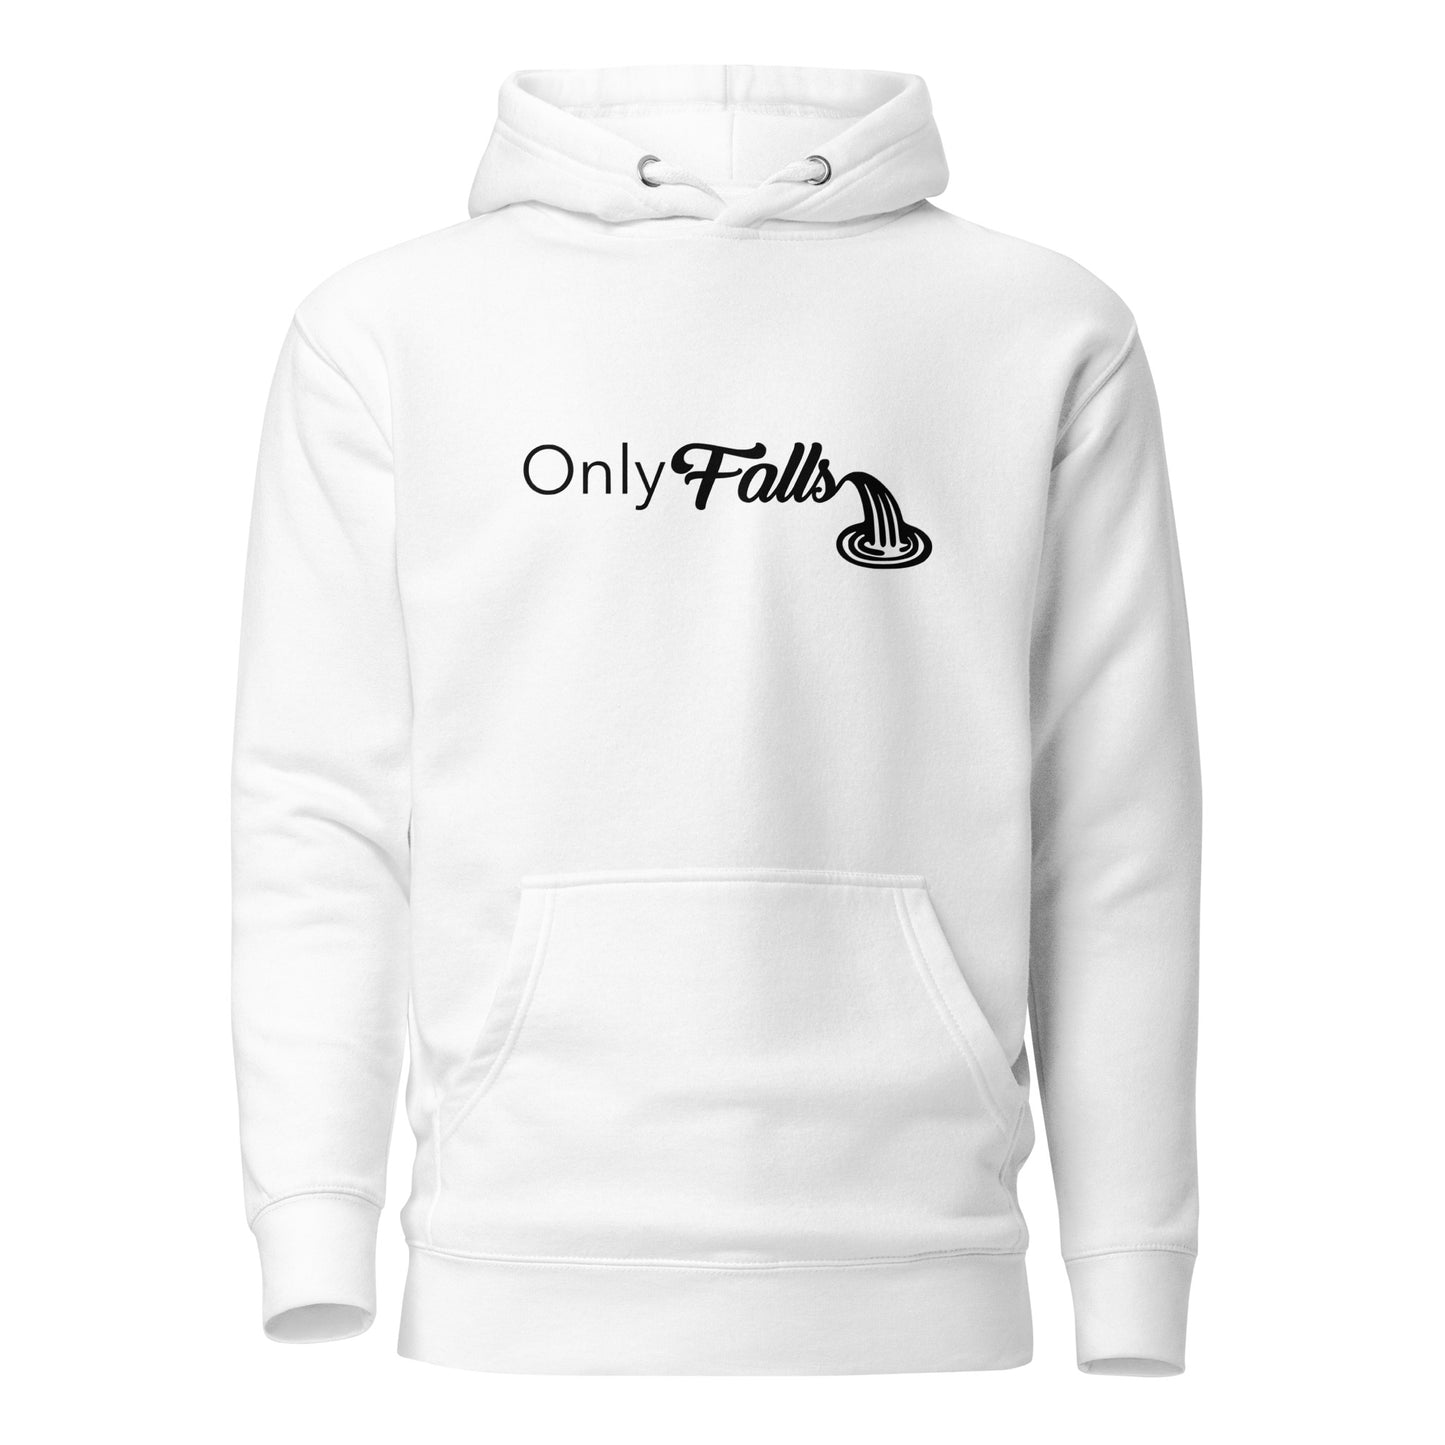 Only Falls Hoodie